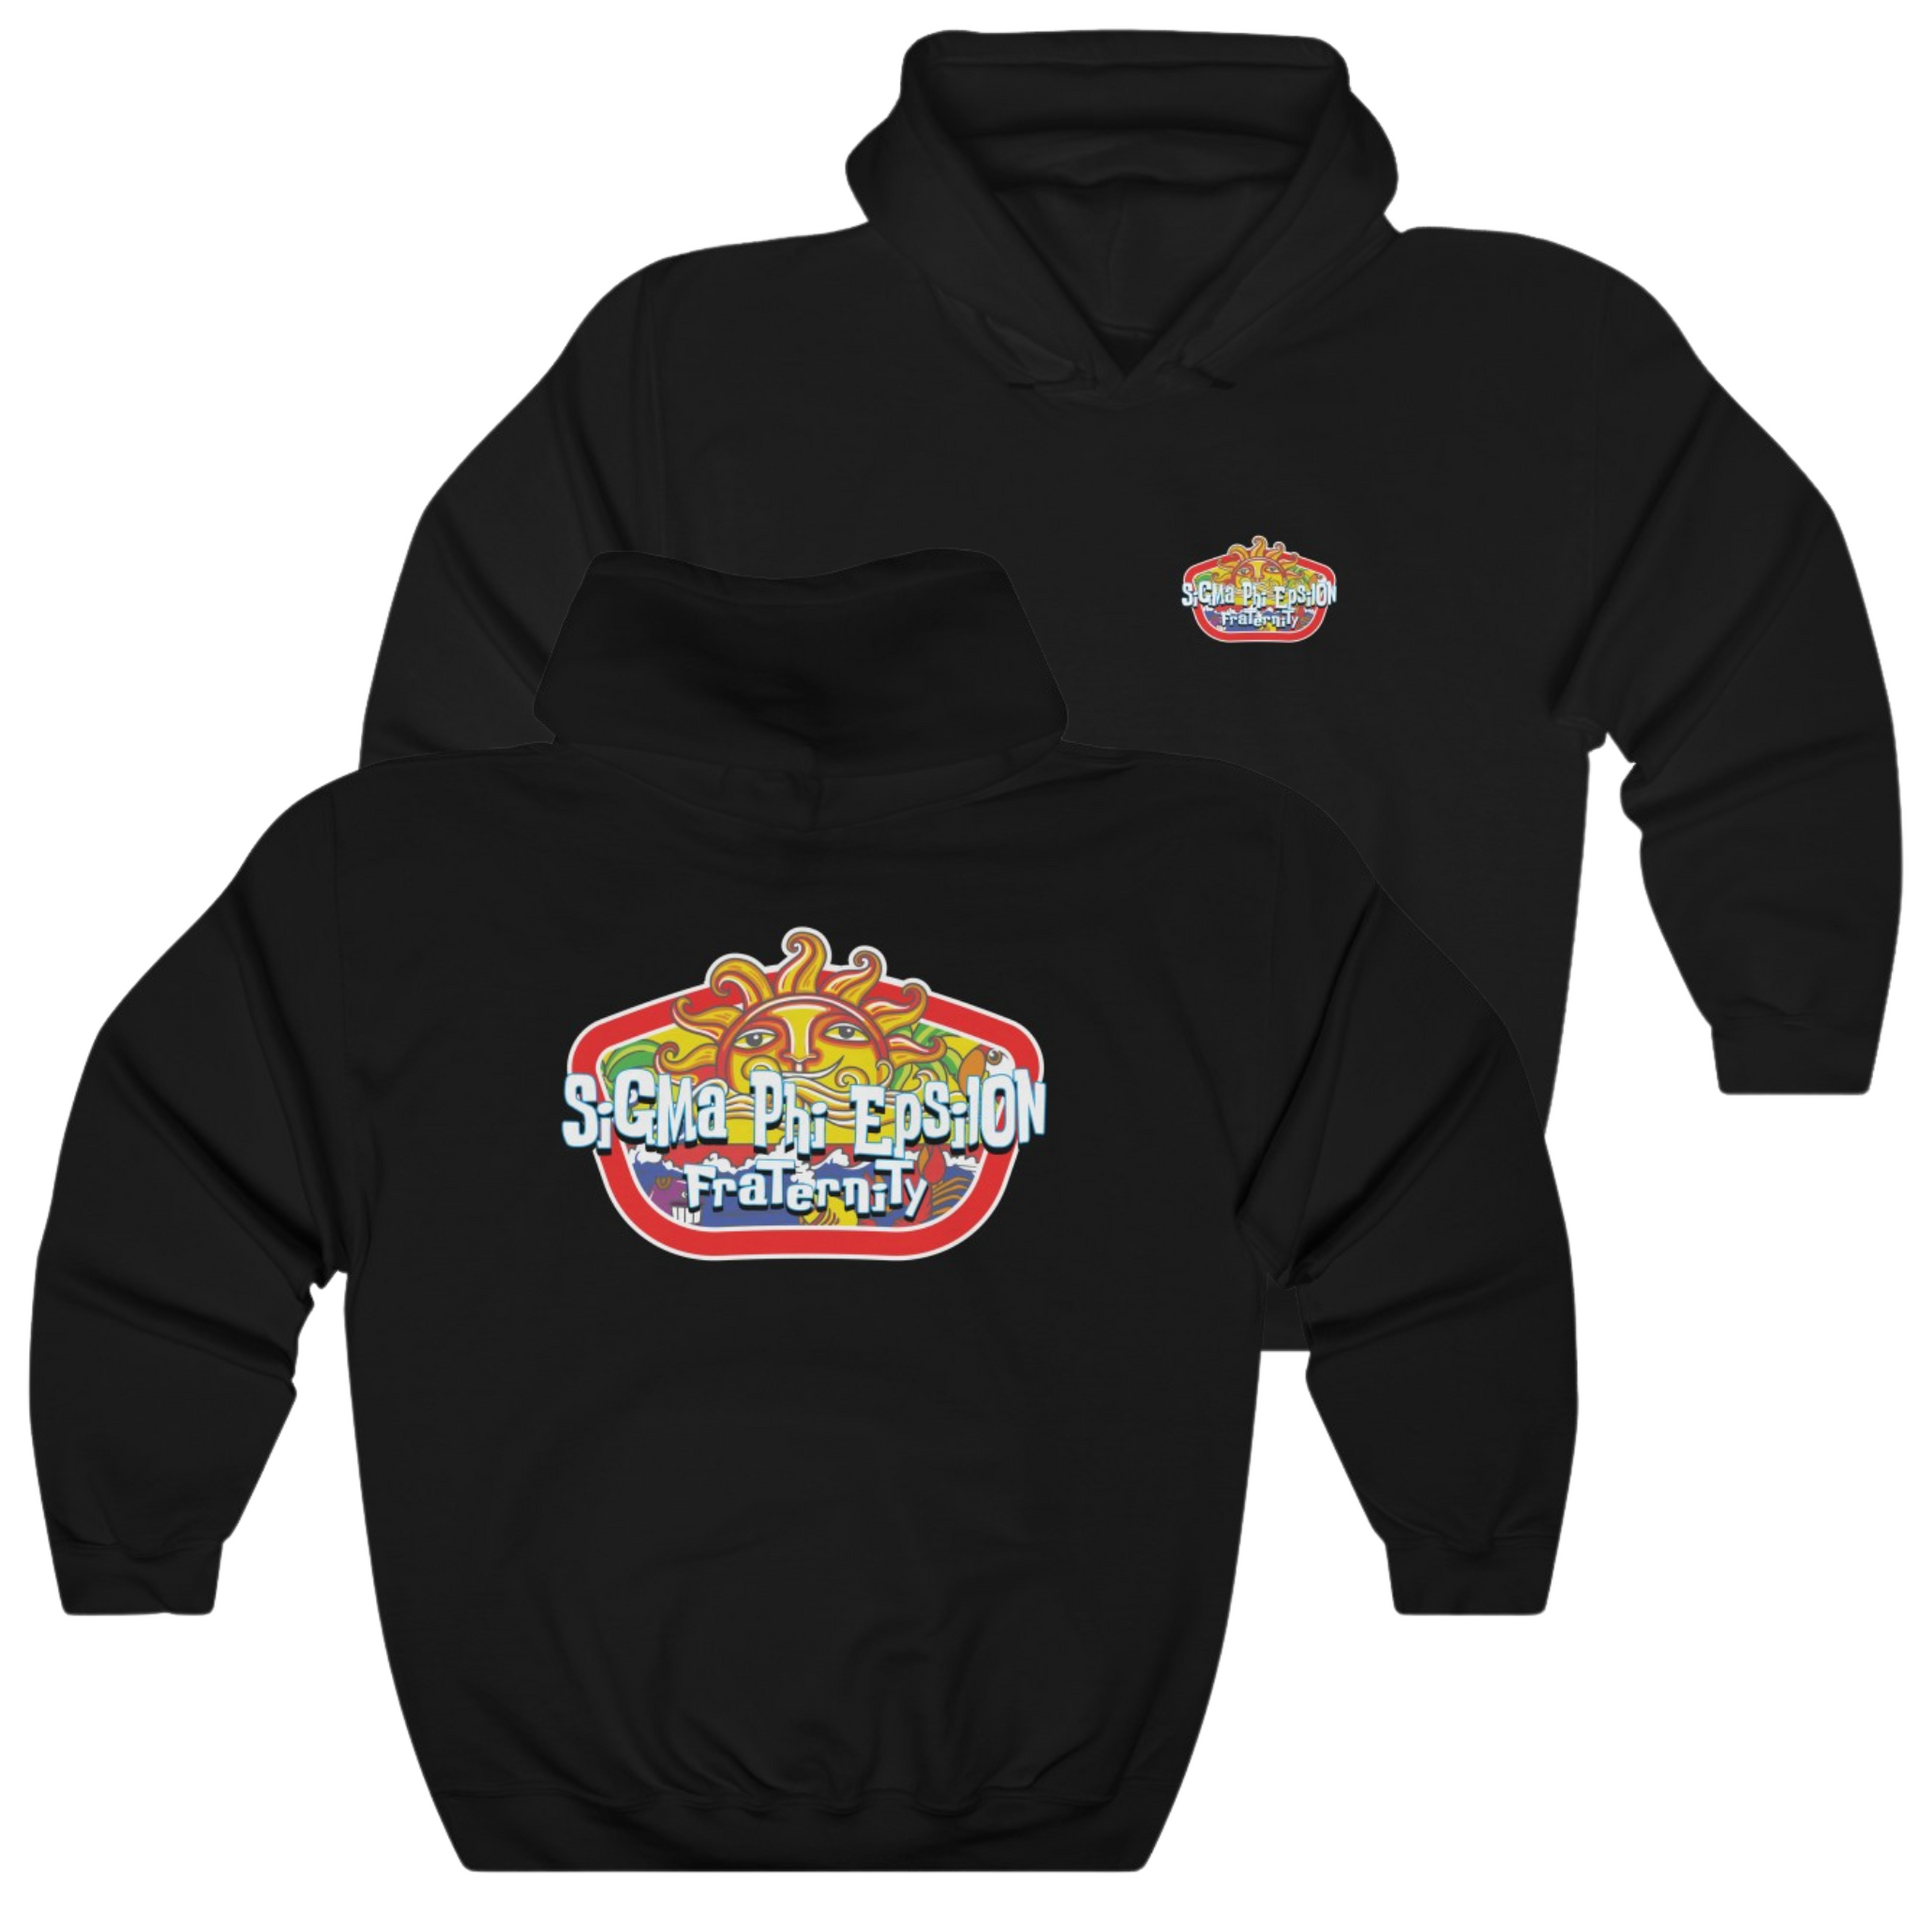 Black Sigma Phi Epsilon Graphic Hoodie | Summer Sol | SigEp Fraternity Clothes and Merchandise